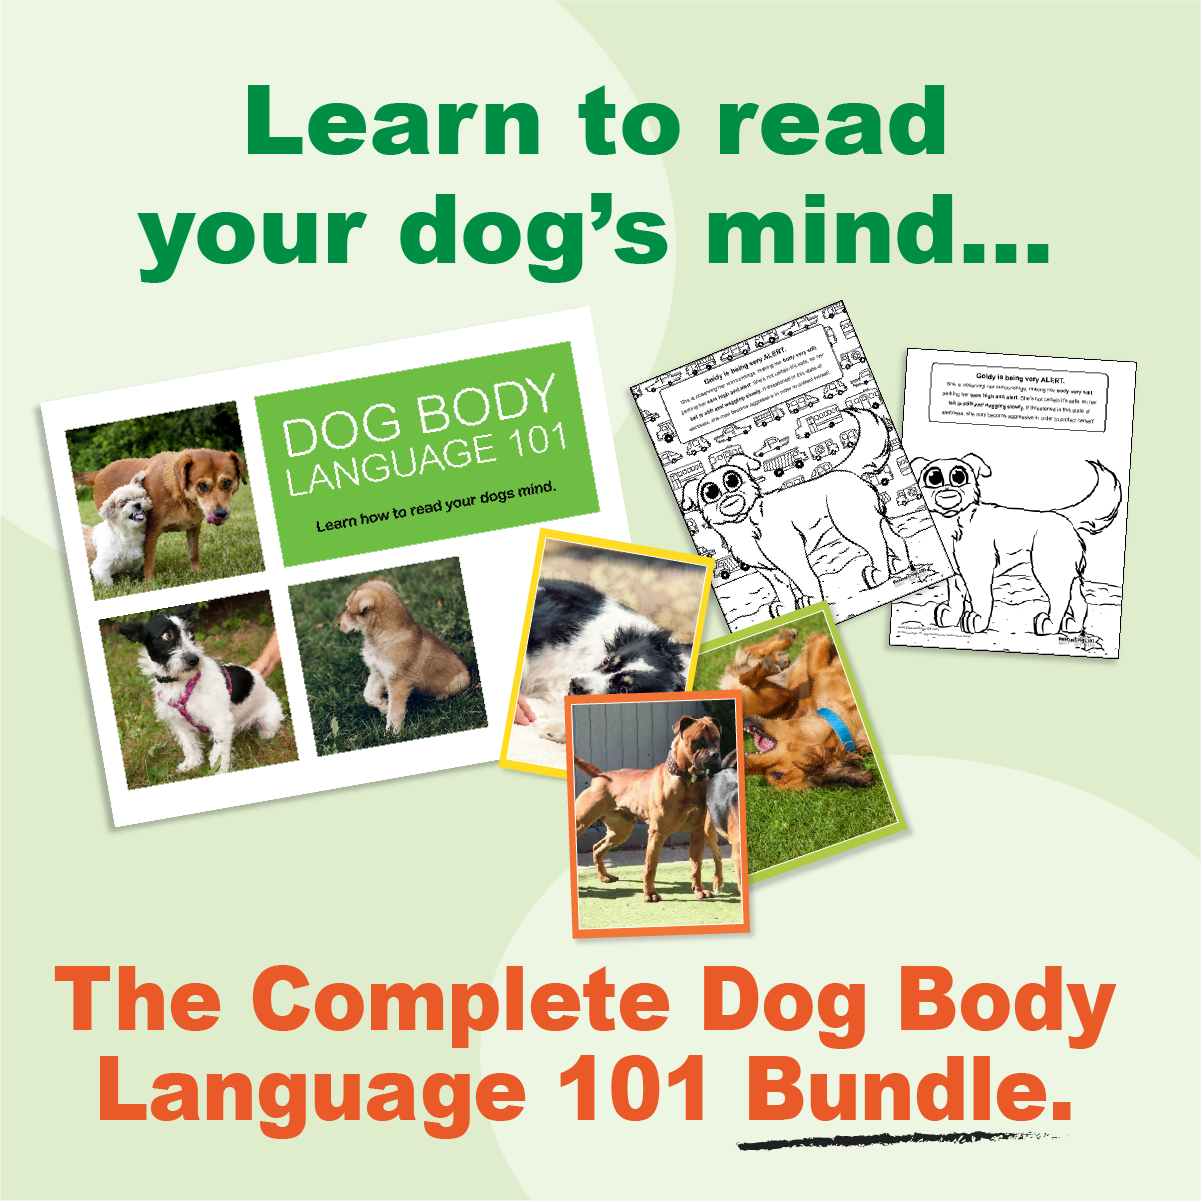 Learn to read your dog's mind... the complete dog body language 101 bundle